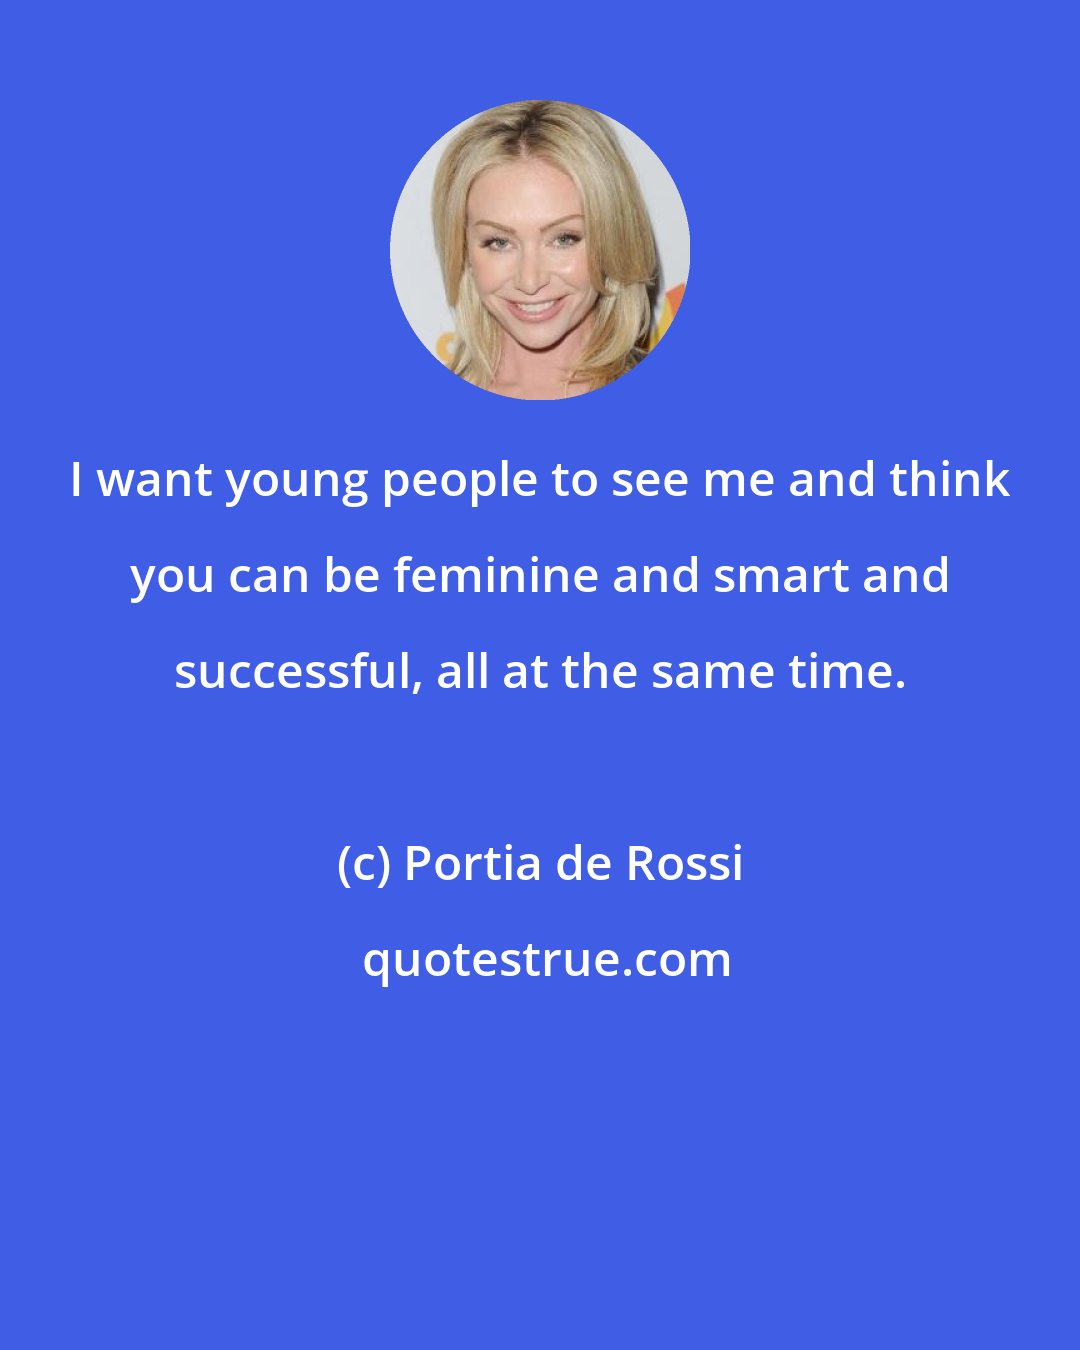 Portia de Rossi: I want young people to see me and think you can be feminine and smart and successful, all at the same time.